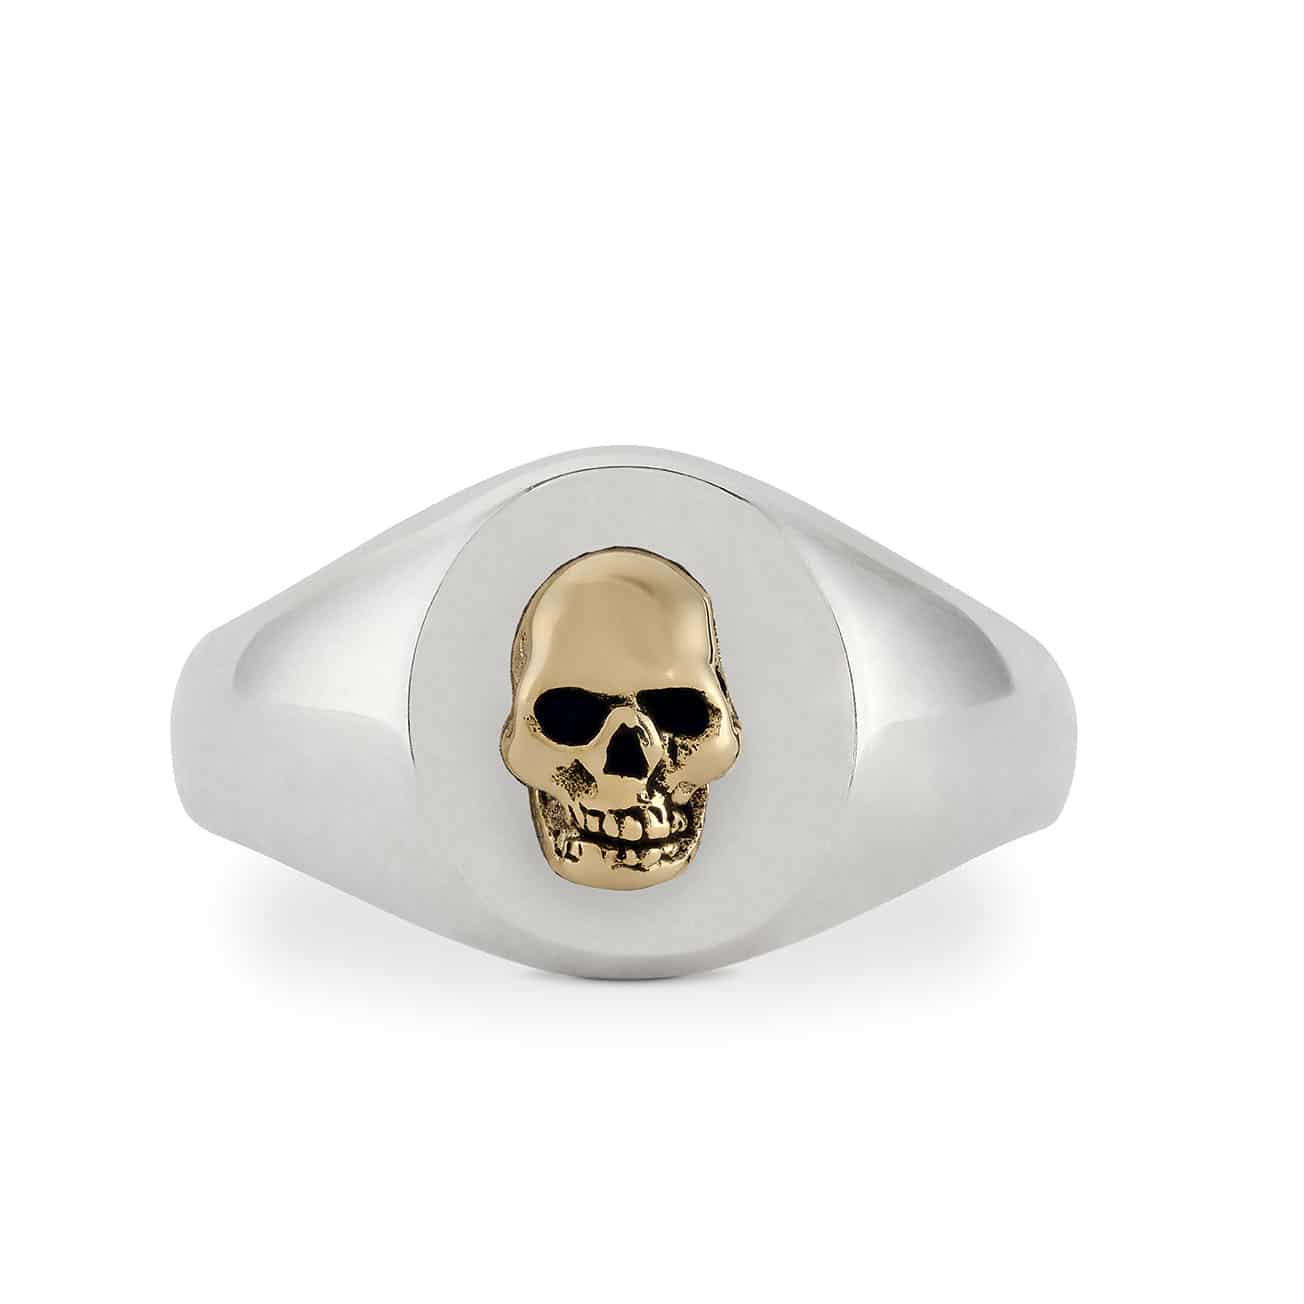 Small-signet-with-front-facing-gold-skull-front-low-res.jpg